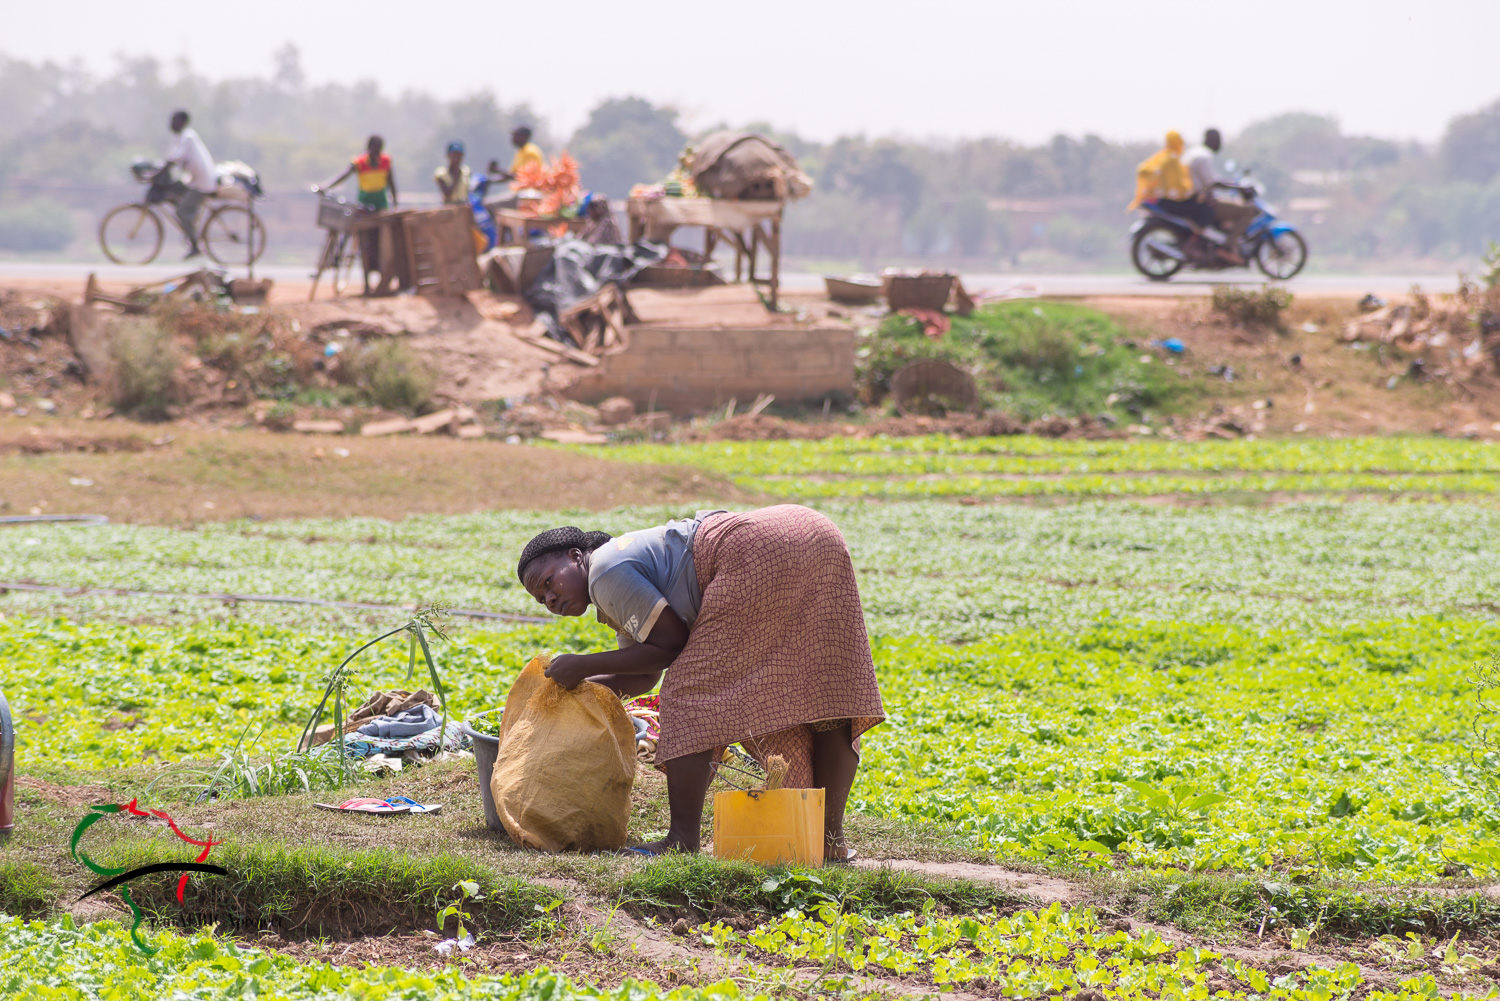 Woman gardening in front of a roadside vendor